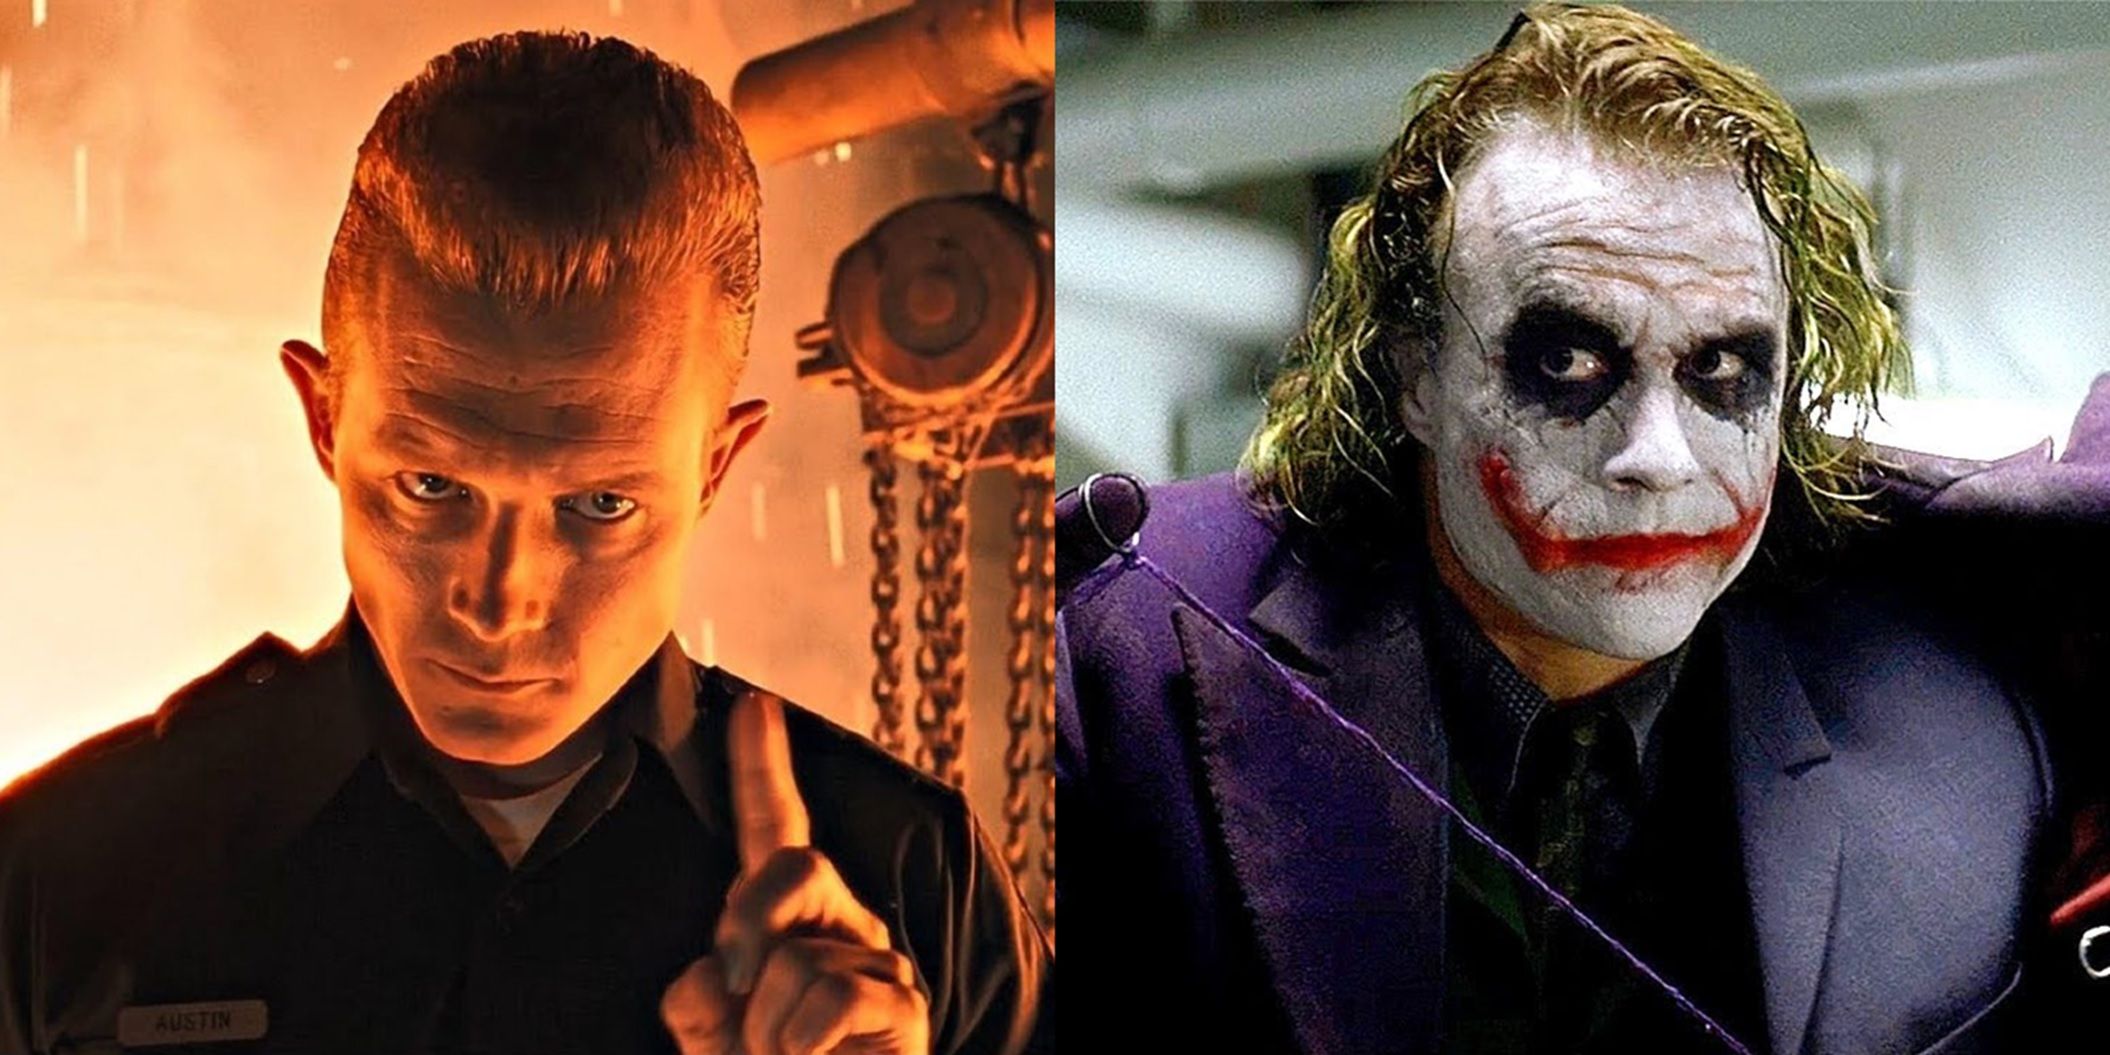 Split image of the T-1000 in Terminator 2 and the Joker in The Dark Knight